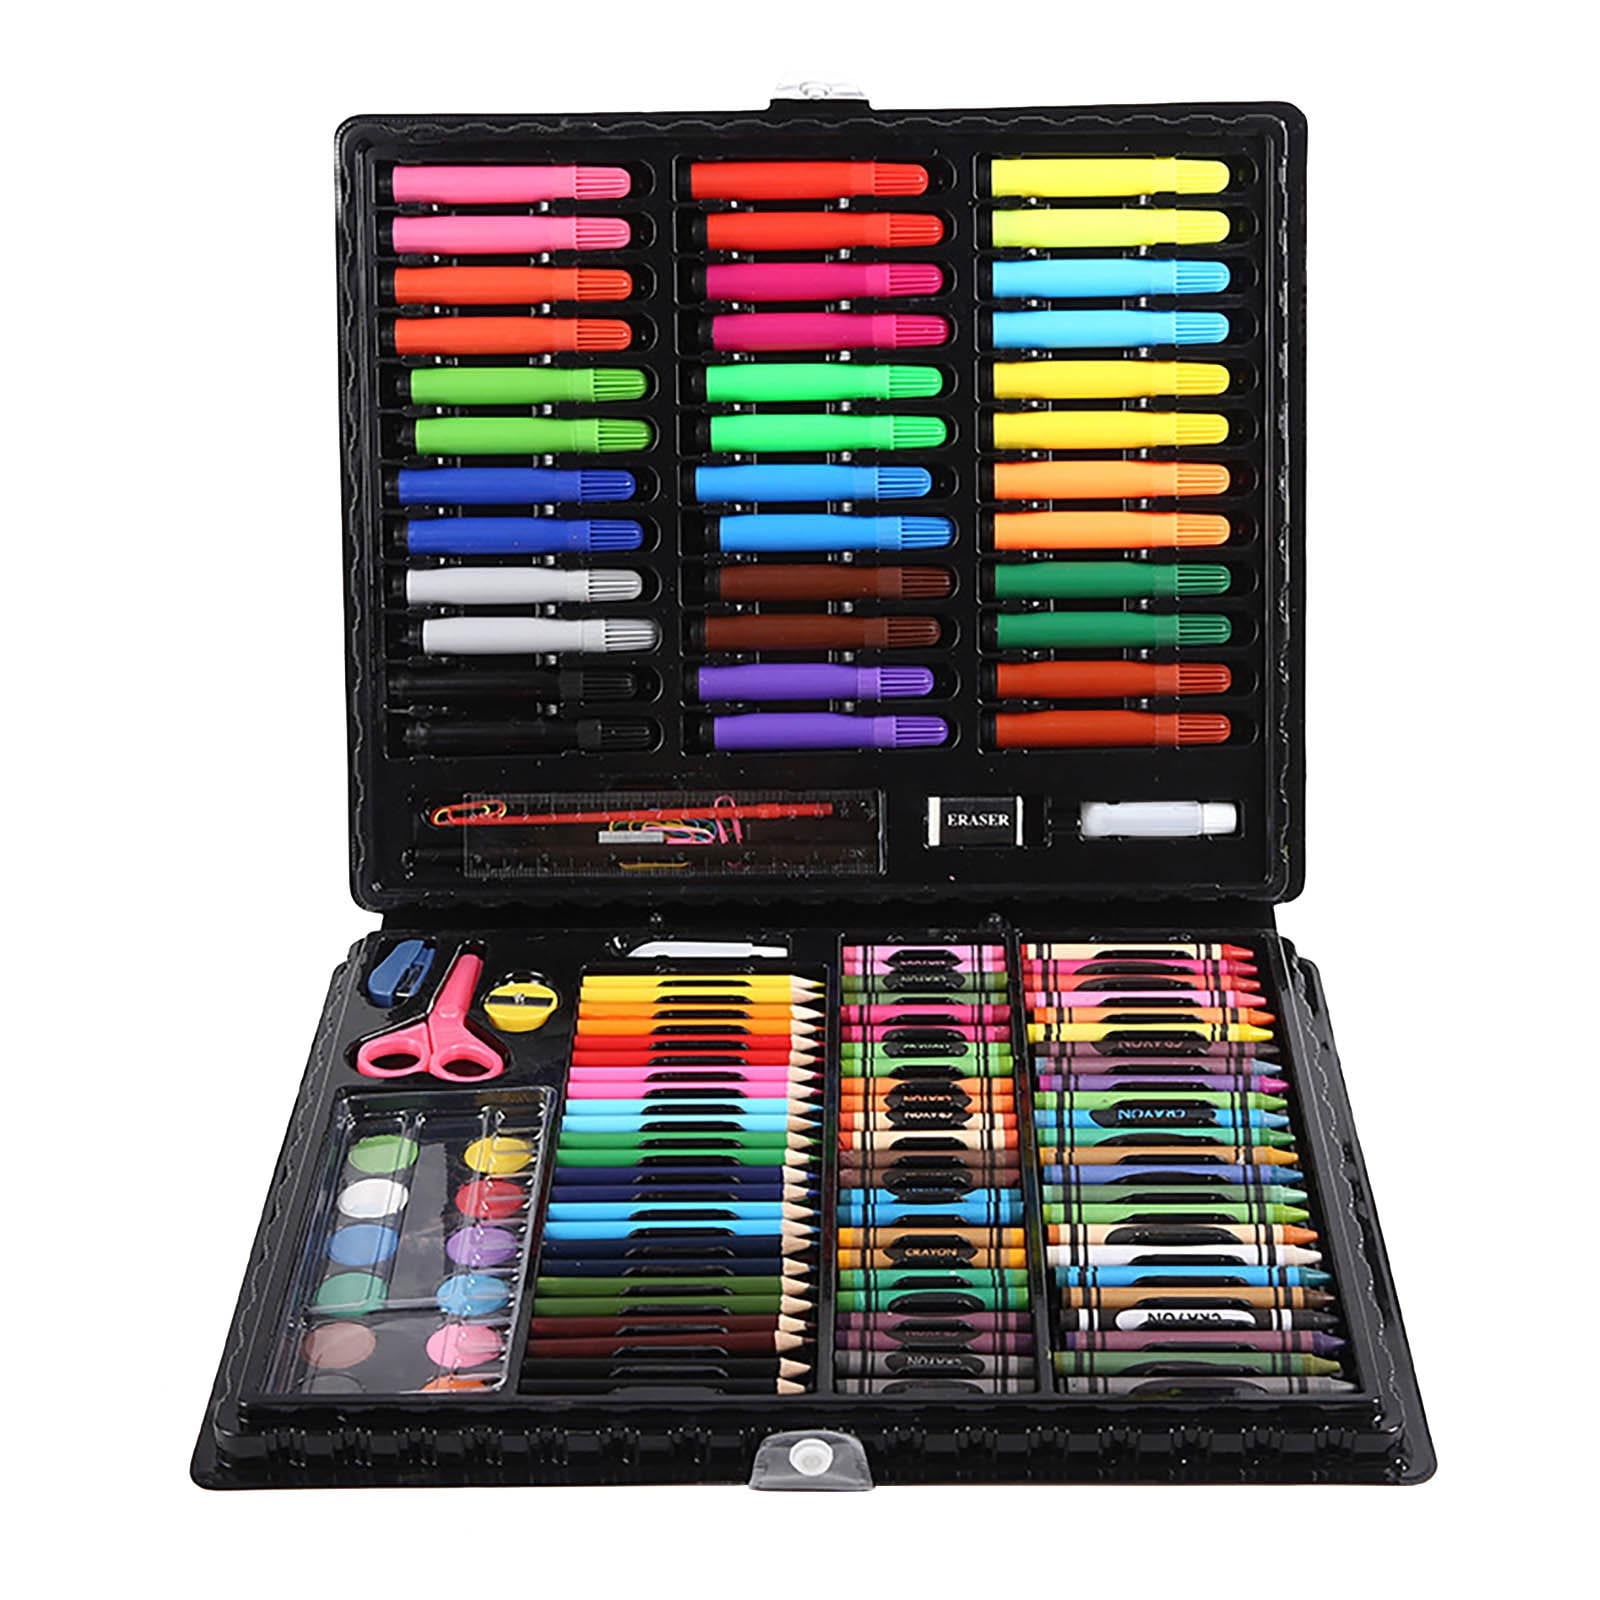 WISHKEY 24 Pieces Washable Water Color Pen Set For Painting,  Coloring For Kids & Adults Fine Rounded Nib Sketch Pens with Washable Ink - Water  Color Pen